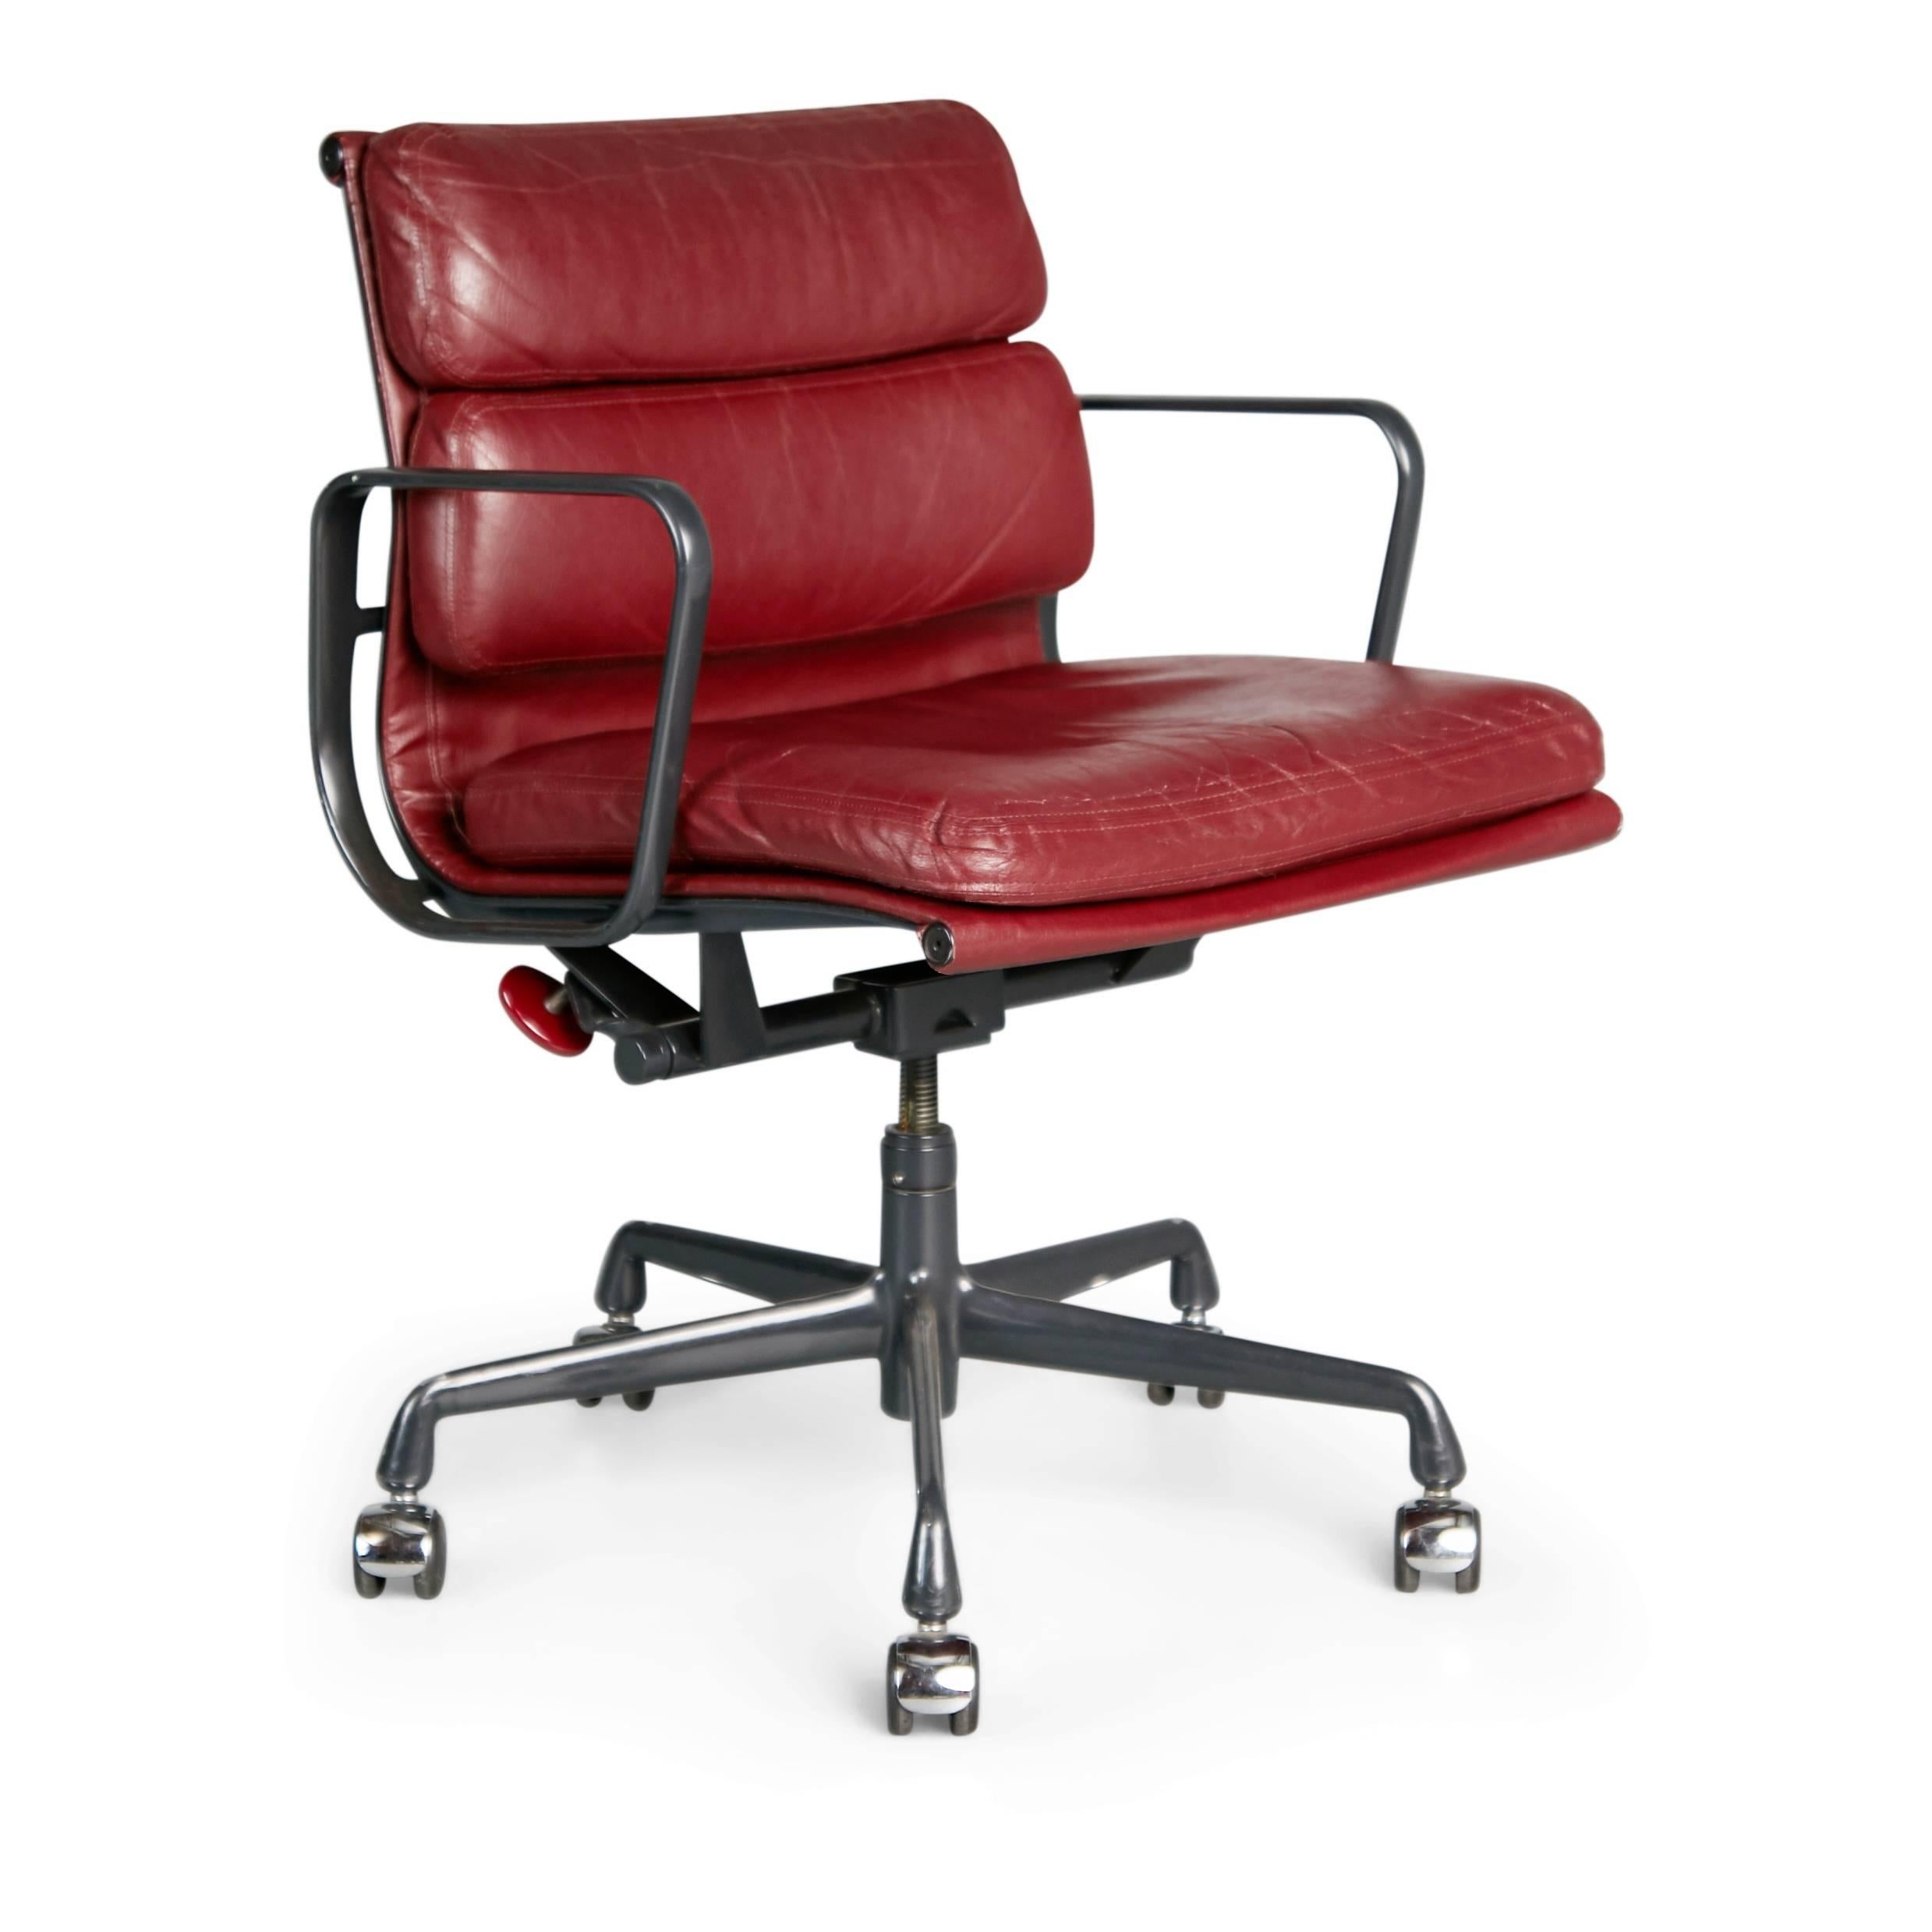 American Charles Eames for Herman Miller Burgundy Soft Pad Management Chairs, circa 1980